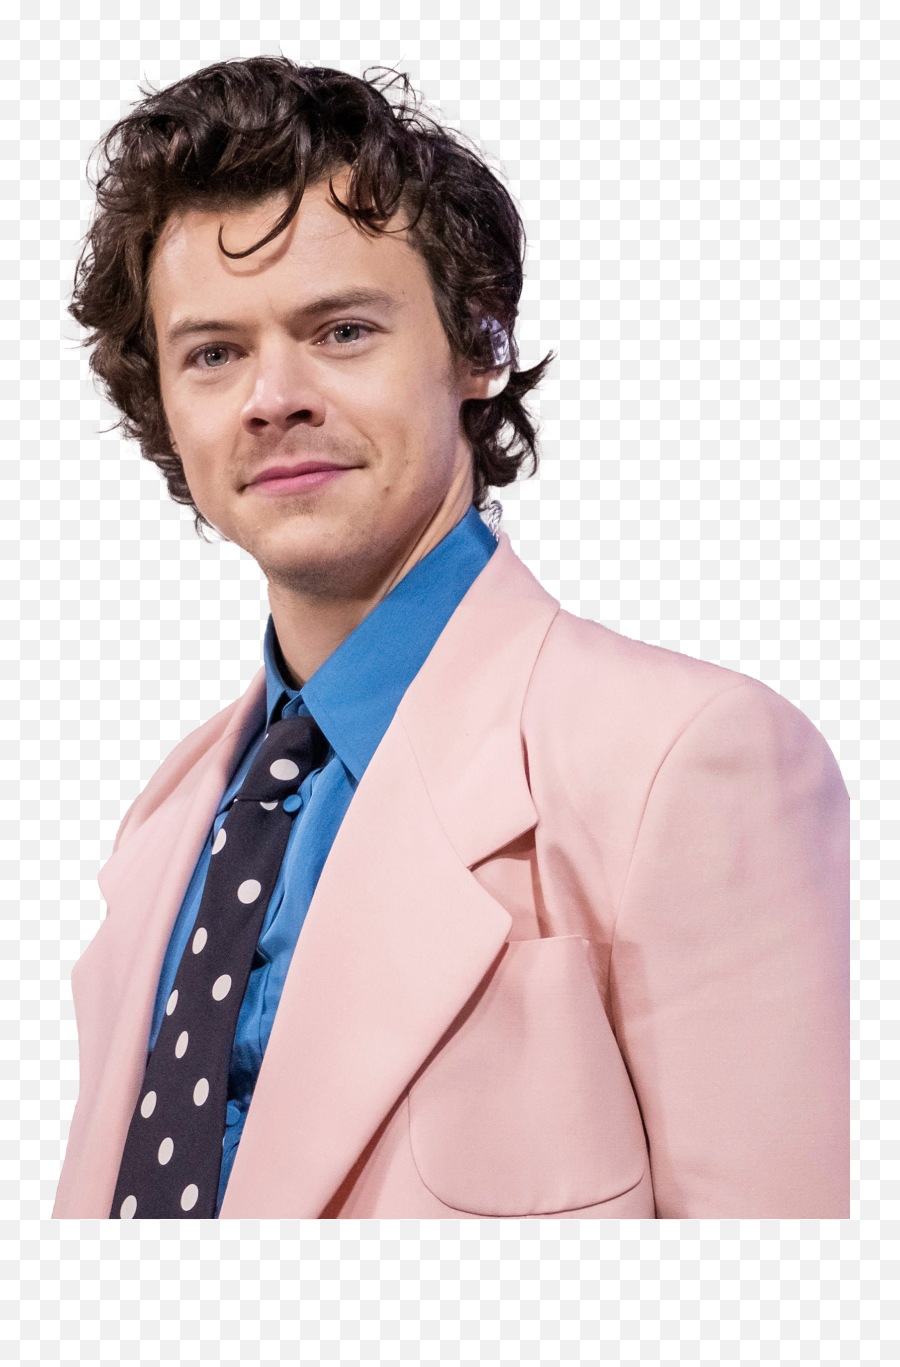 Singer Harry Styles Png Free Image - Harry Styles Shaved Head,Harry Styles Png